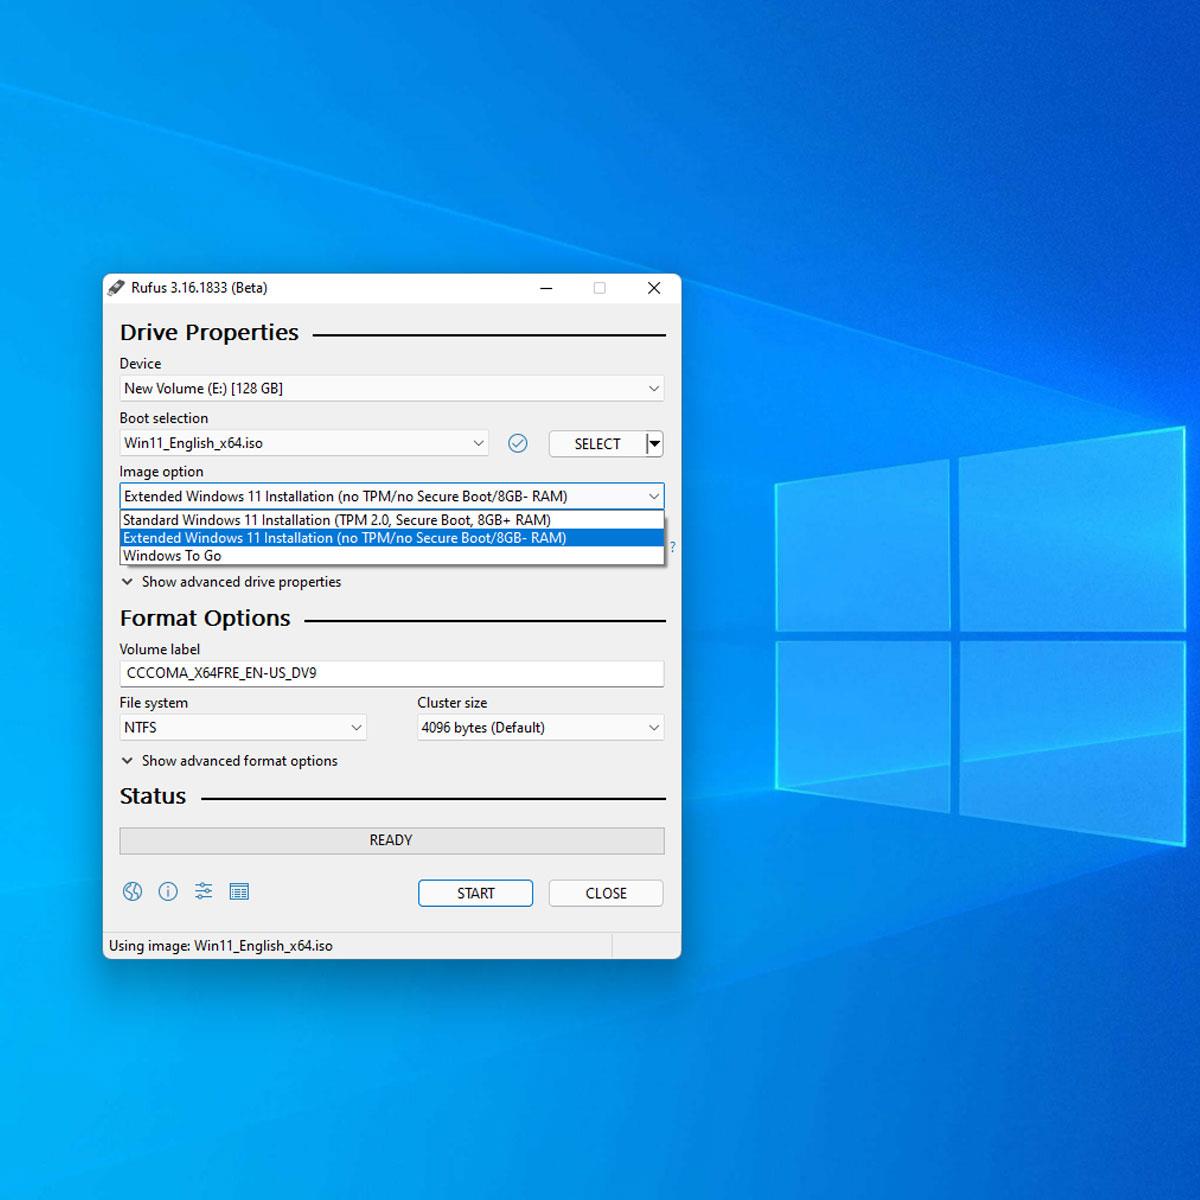 How To Easily Create A Custom Windows 11 Install That Skips TPM And Other  Requirements